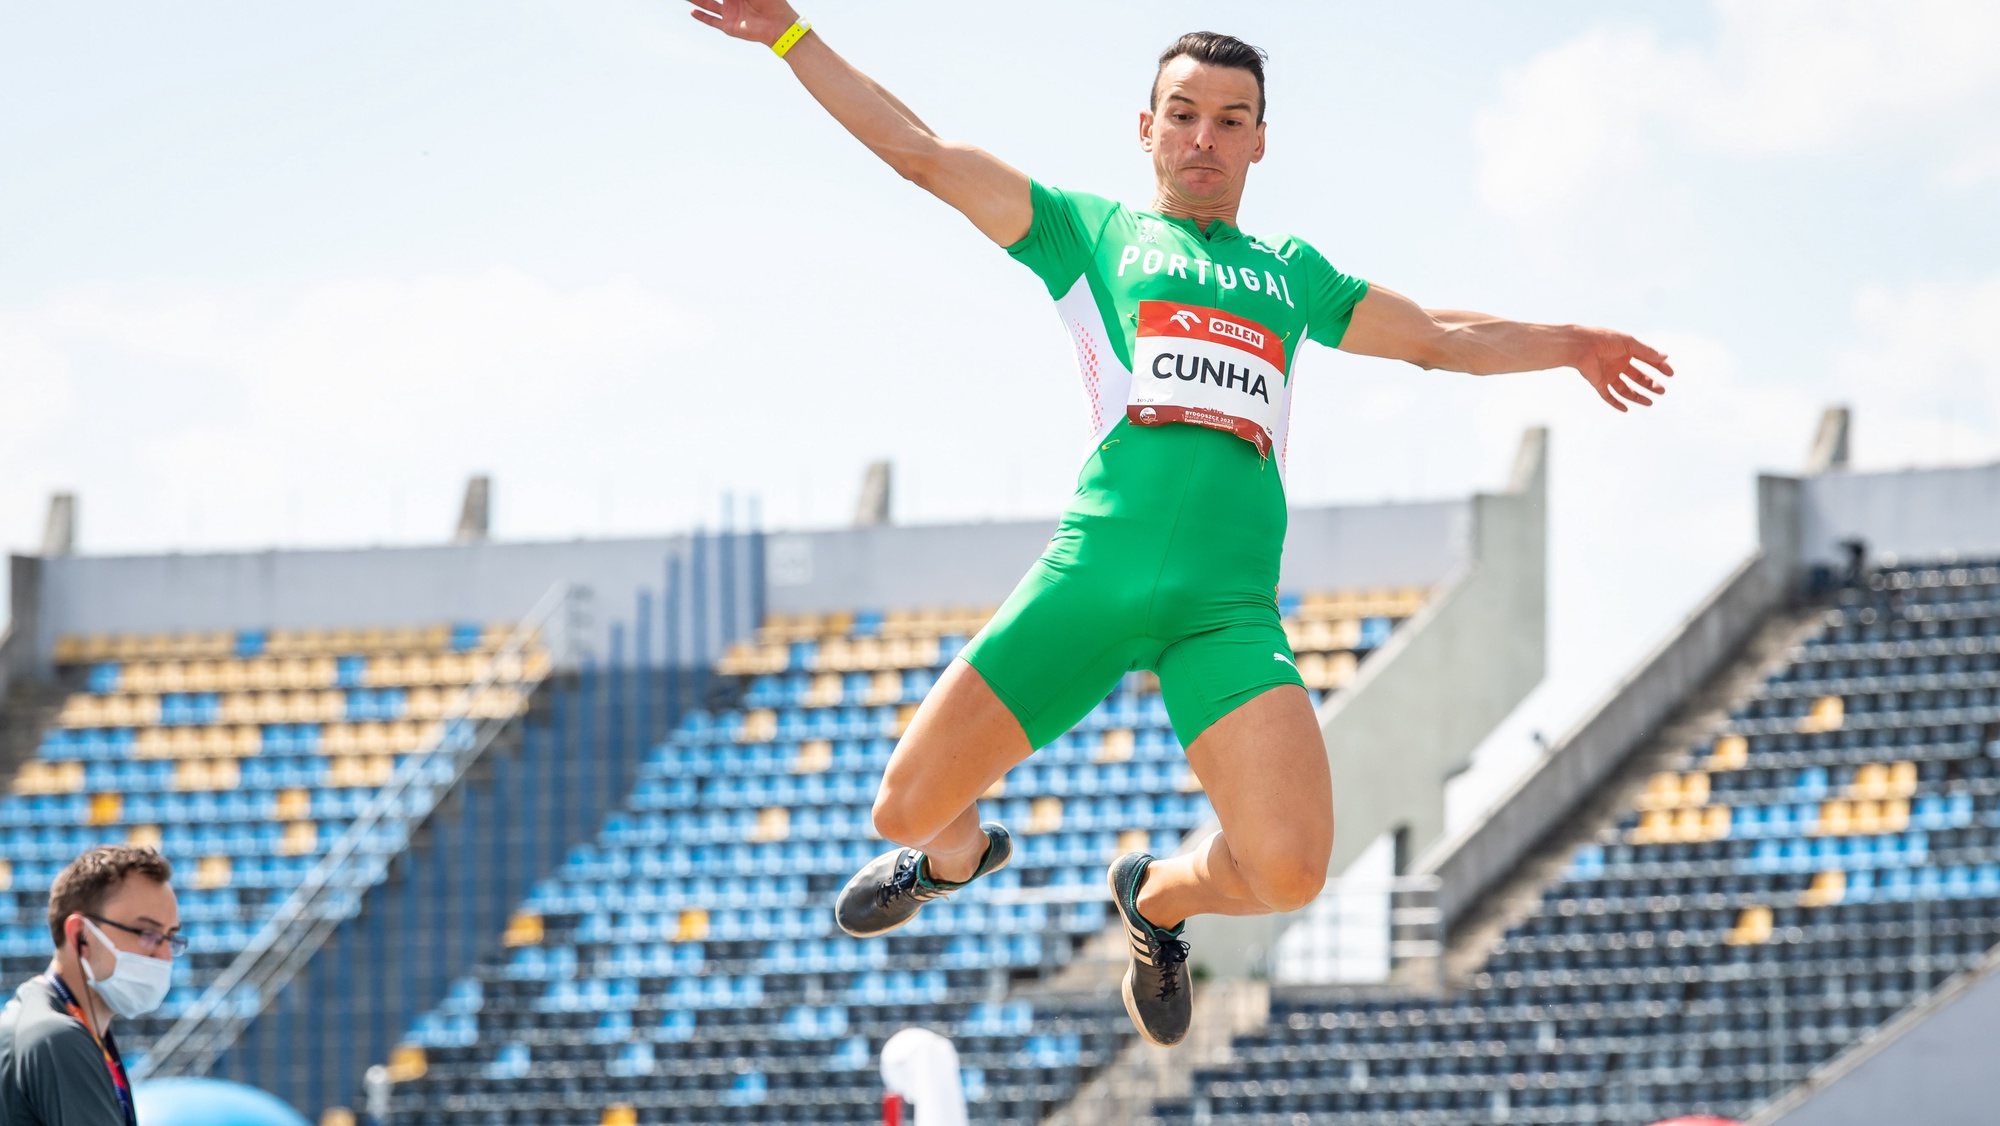 epa09248673 Lenine Cunha of the Portugal in action during the Men&#039;s Long Jump T20 Final at the European Para Athletics Championships in Bydgoszcz, northern Poland, 04 June 2021.  EPA/Tytus Zmijewski POLAND OUT